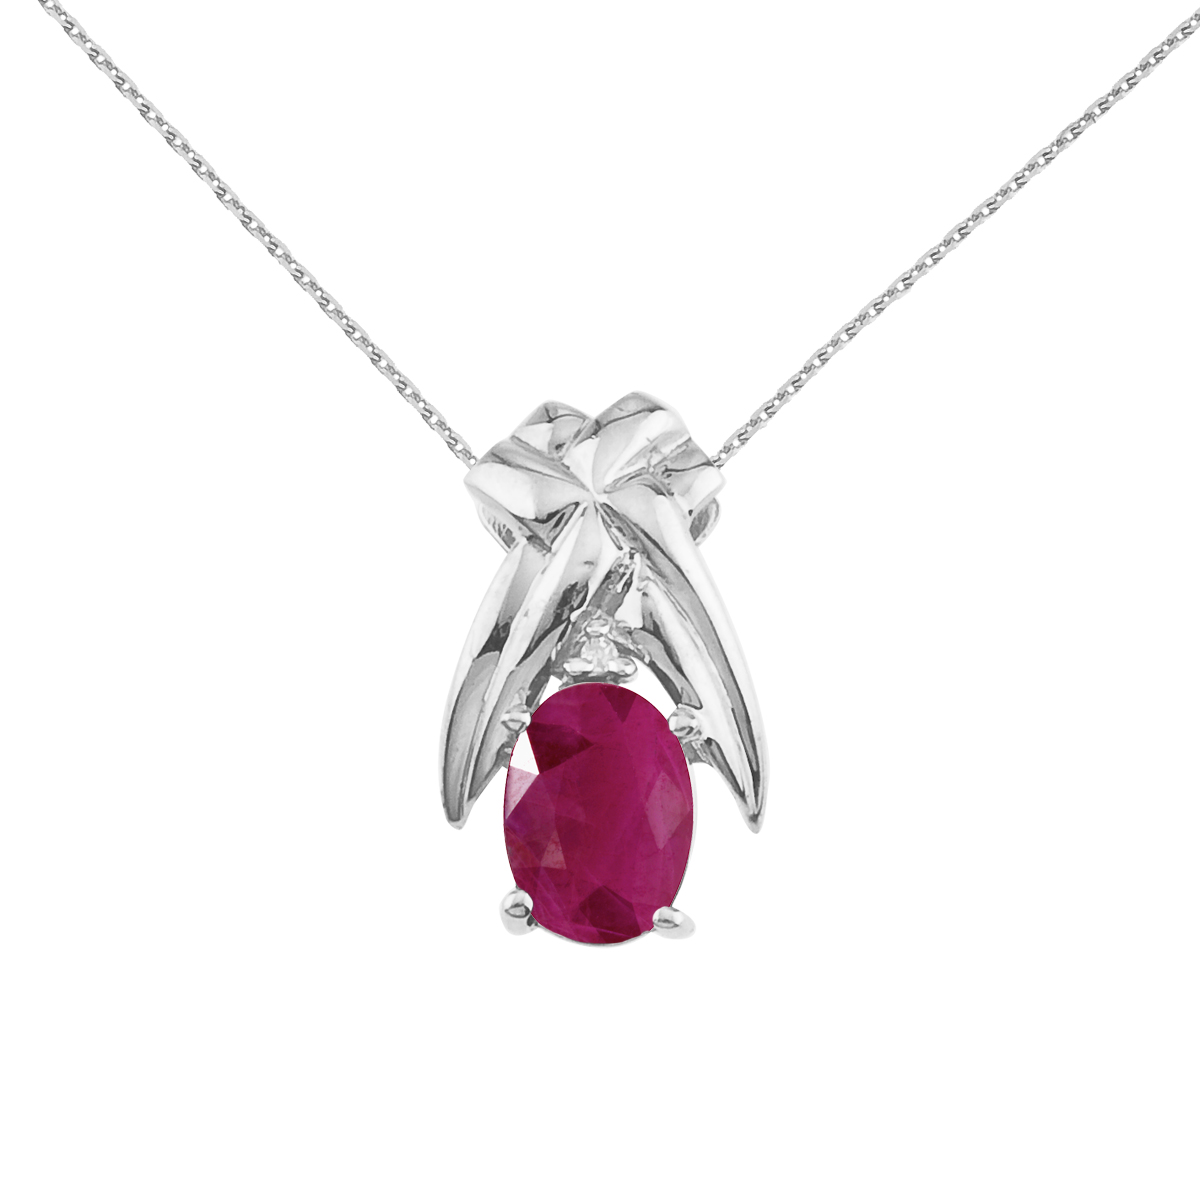 JCX2721: 7x5 mm natural ruby and diamond accented pendant in 14k yellow gold.